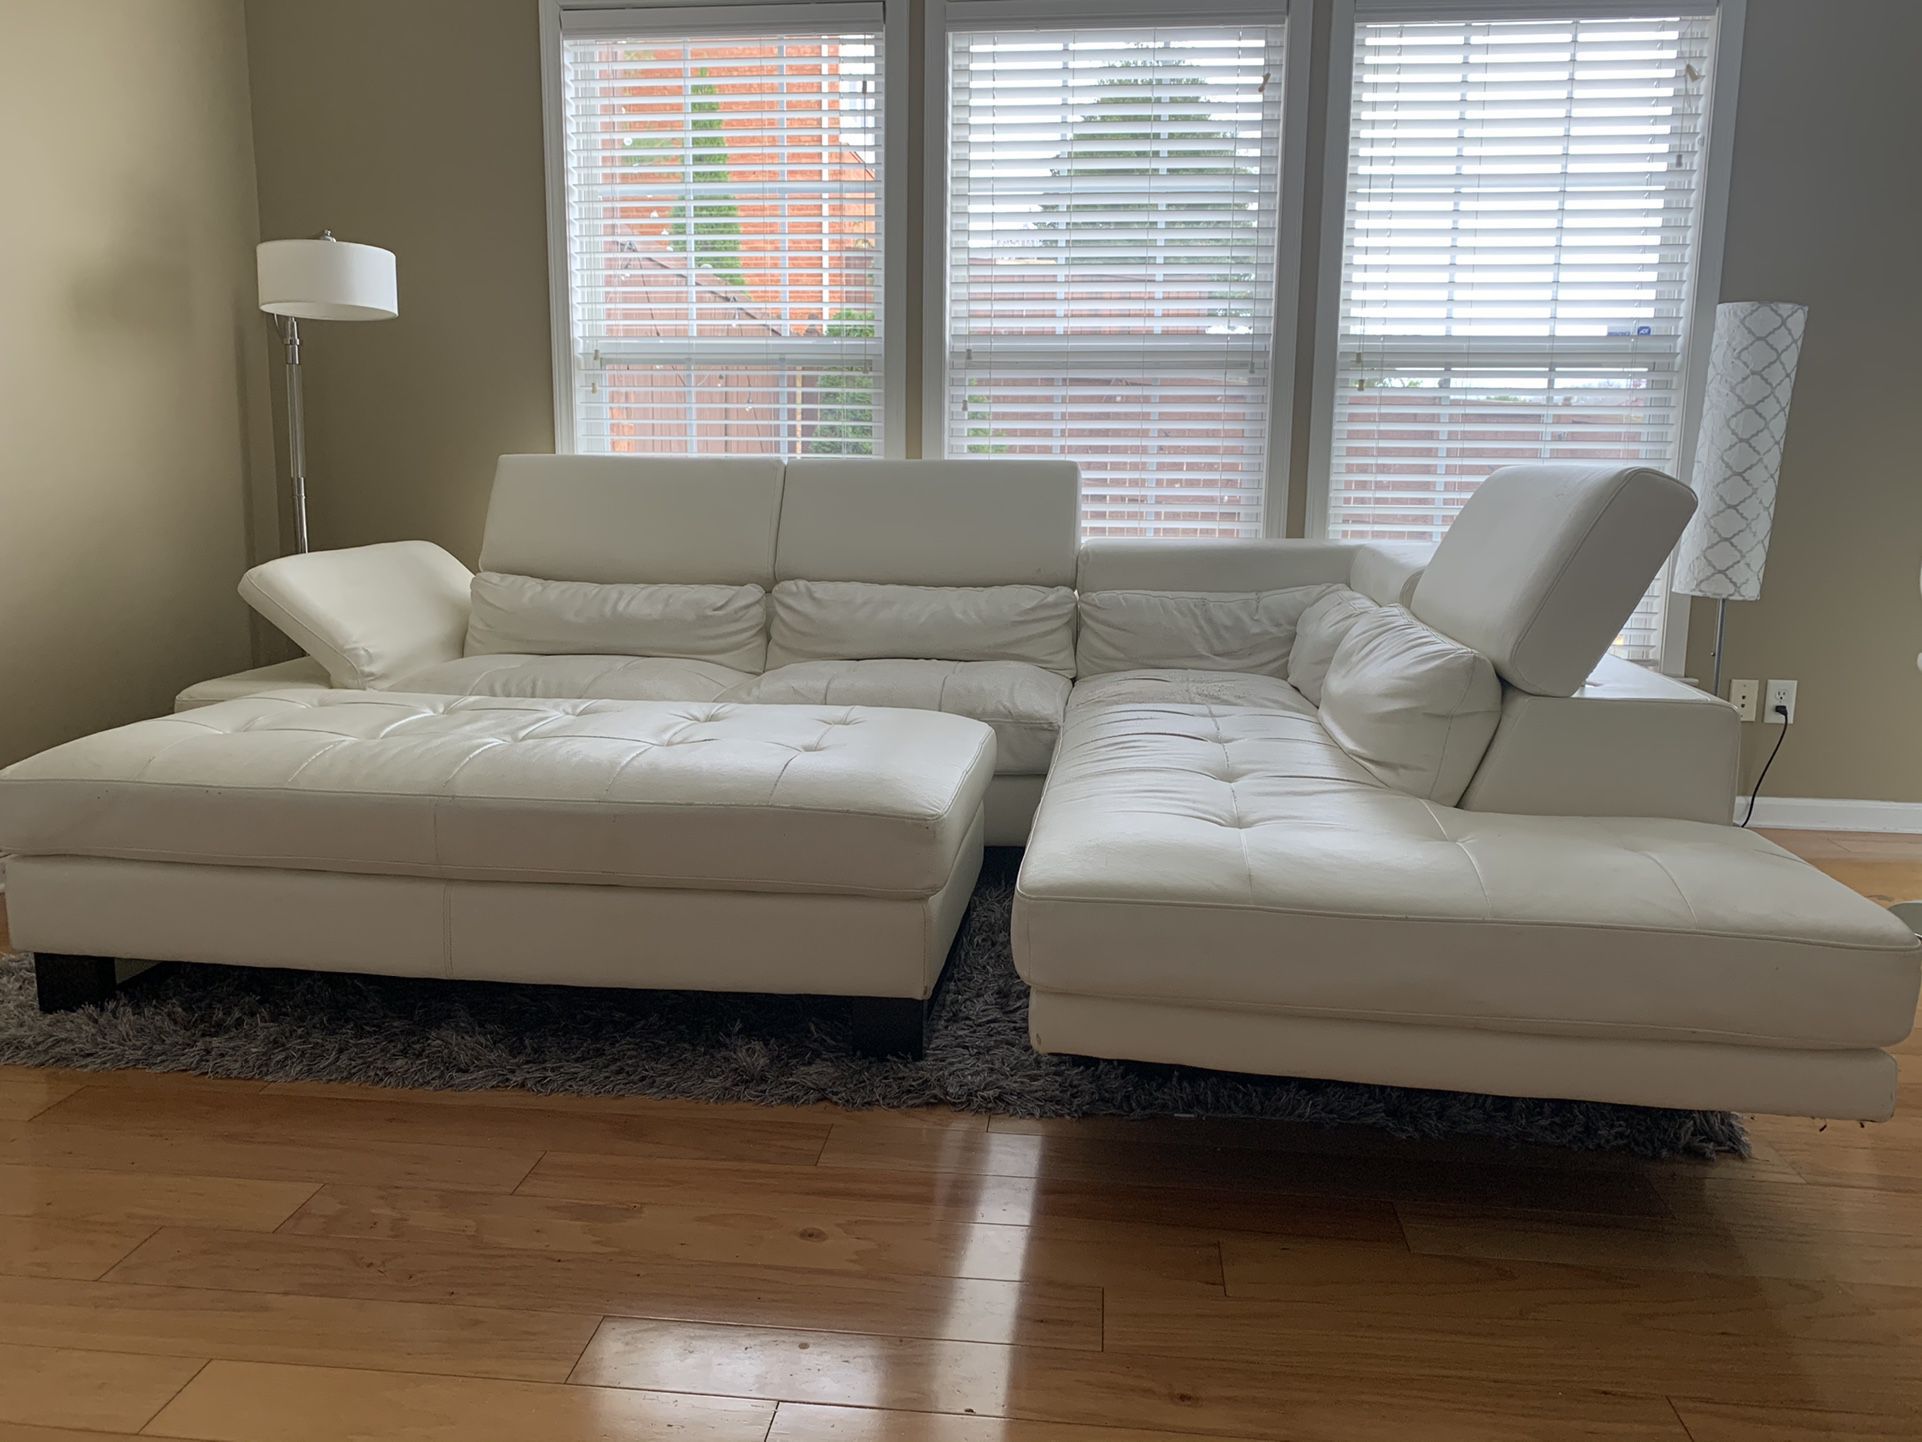 White Leather Sectional Sofa, Ottoman And Grey Rug